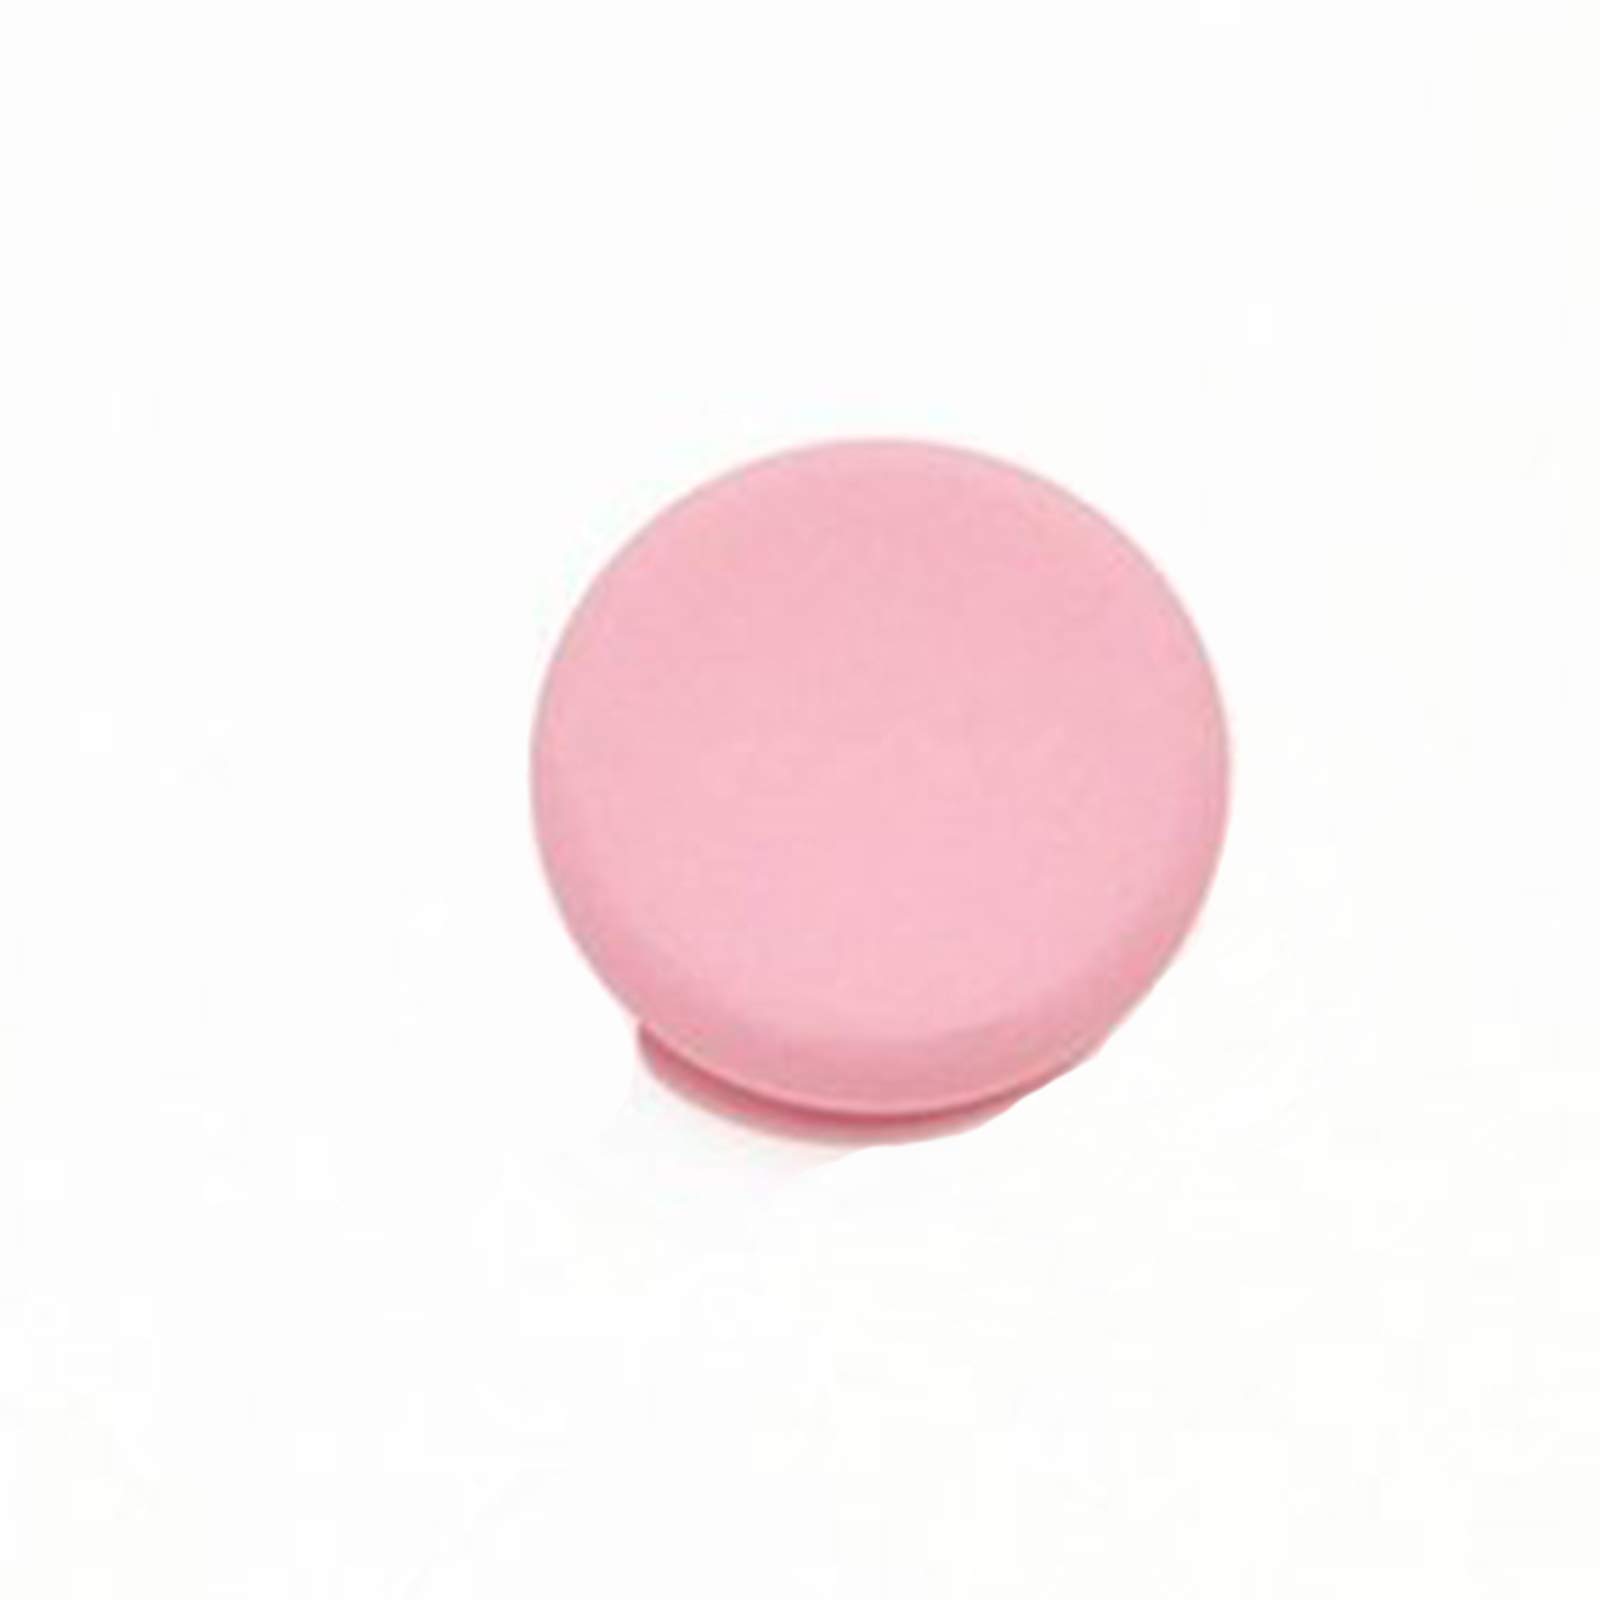 Replacement 3D Analog Joystick Thumb Button Stick Cap Cover Grips for Nintendo 2DS /3DS / 3DS LL / 3DS XL New 3DS / New 3DS LL (Pink)